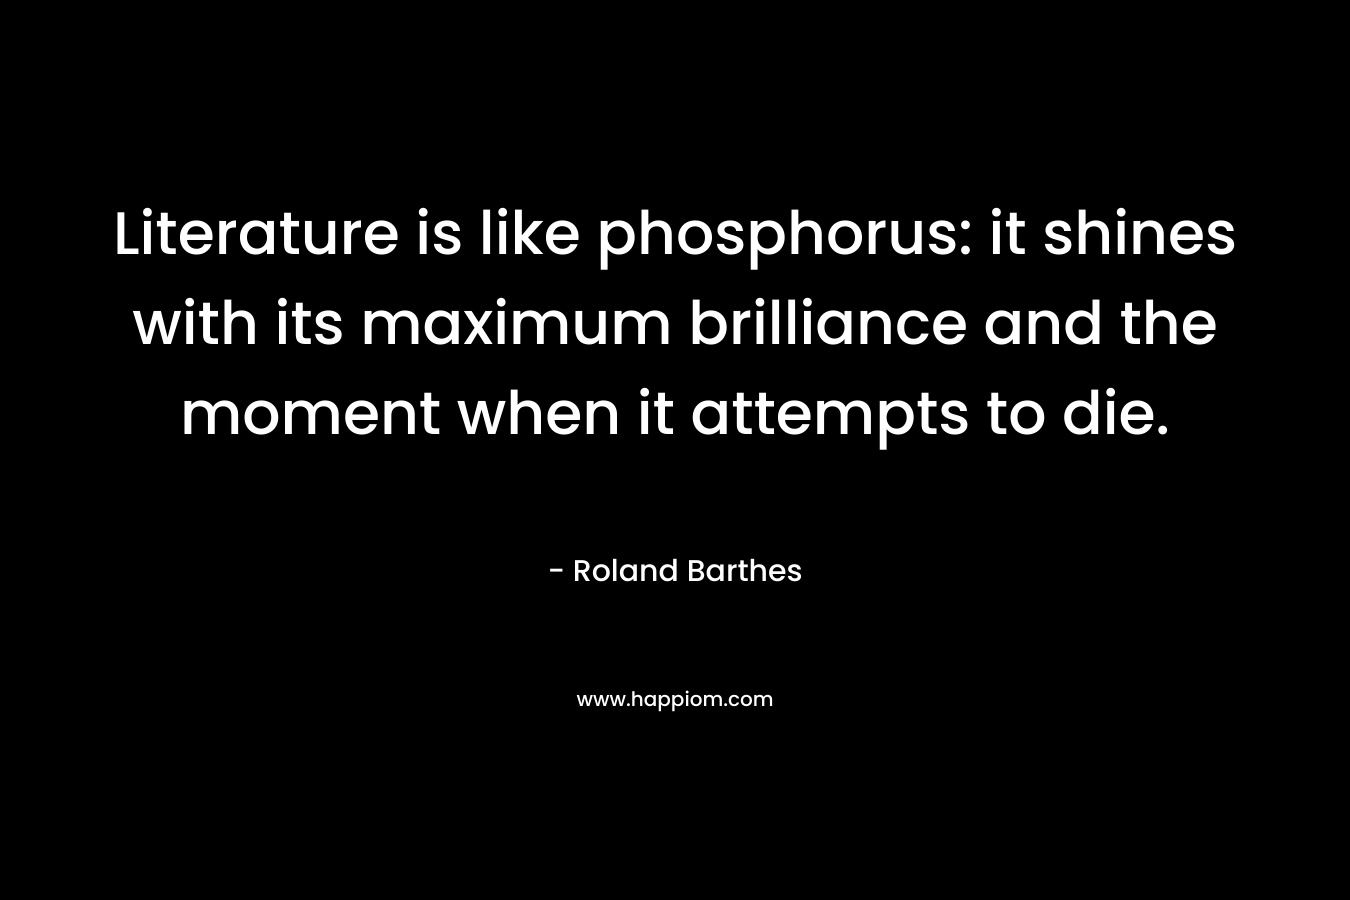 Literature is like phosphorus: it shines with its maximum brilliance and the moment when it attempts to die. – Roland Barthes